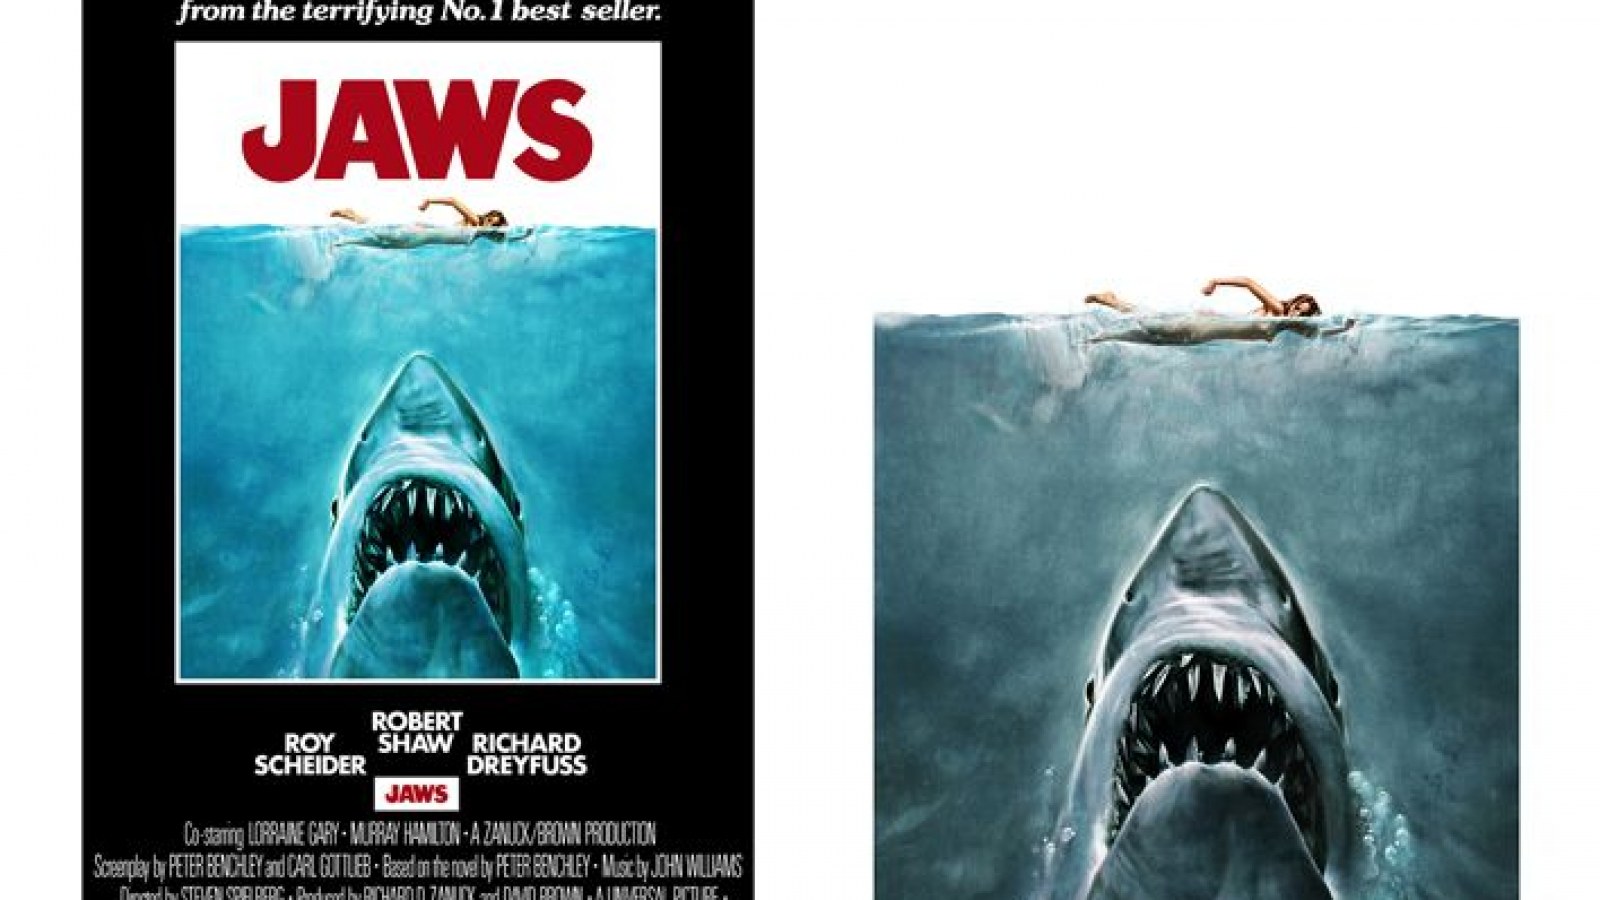 Mondo to Release New 'Jaws' Screen Prints Recreating Missing Original Painting